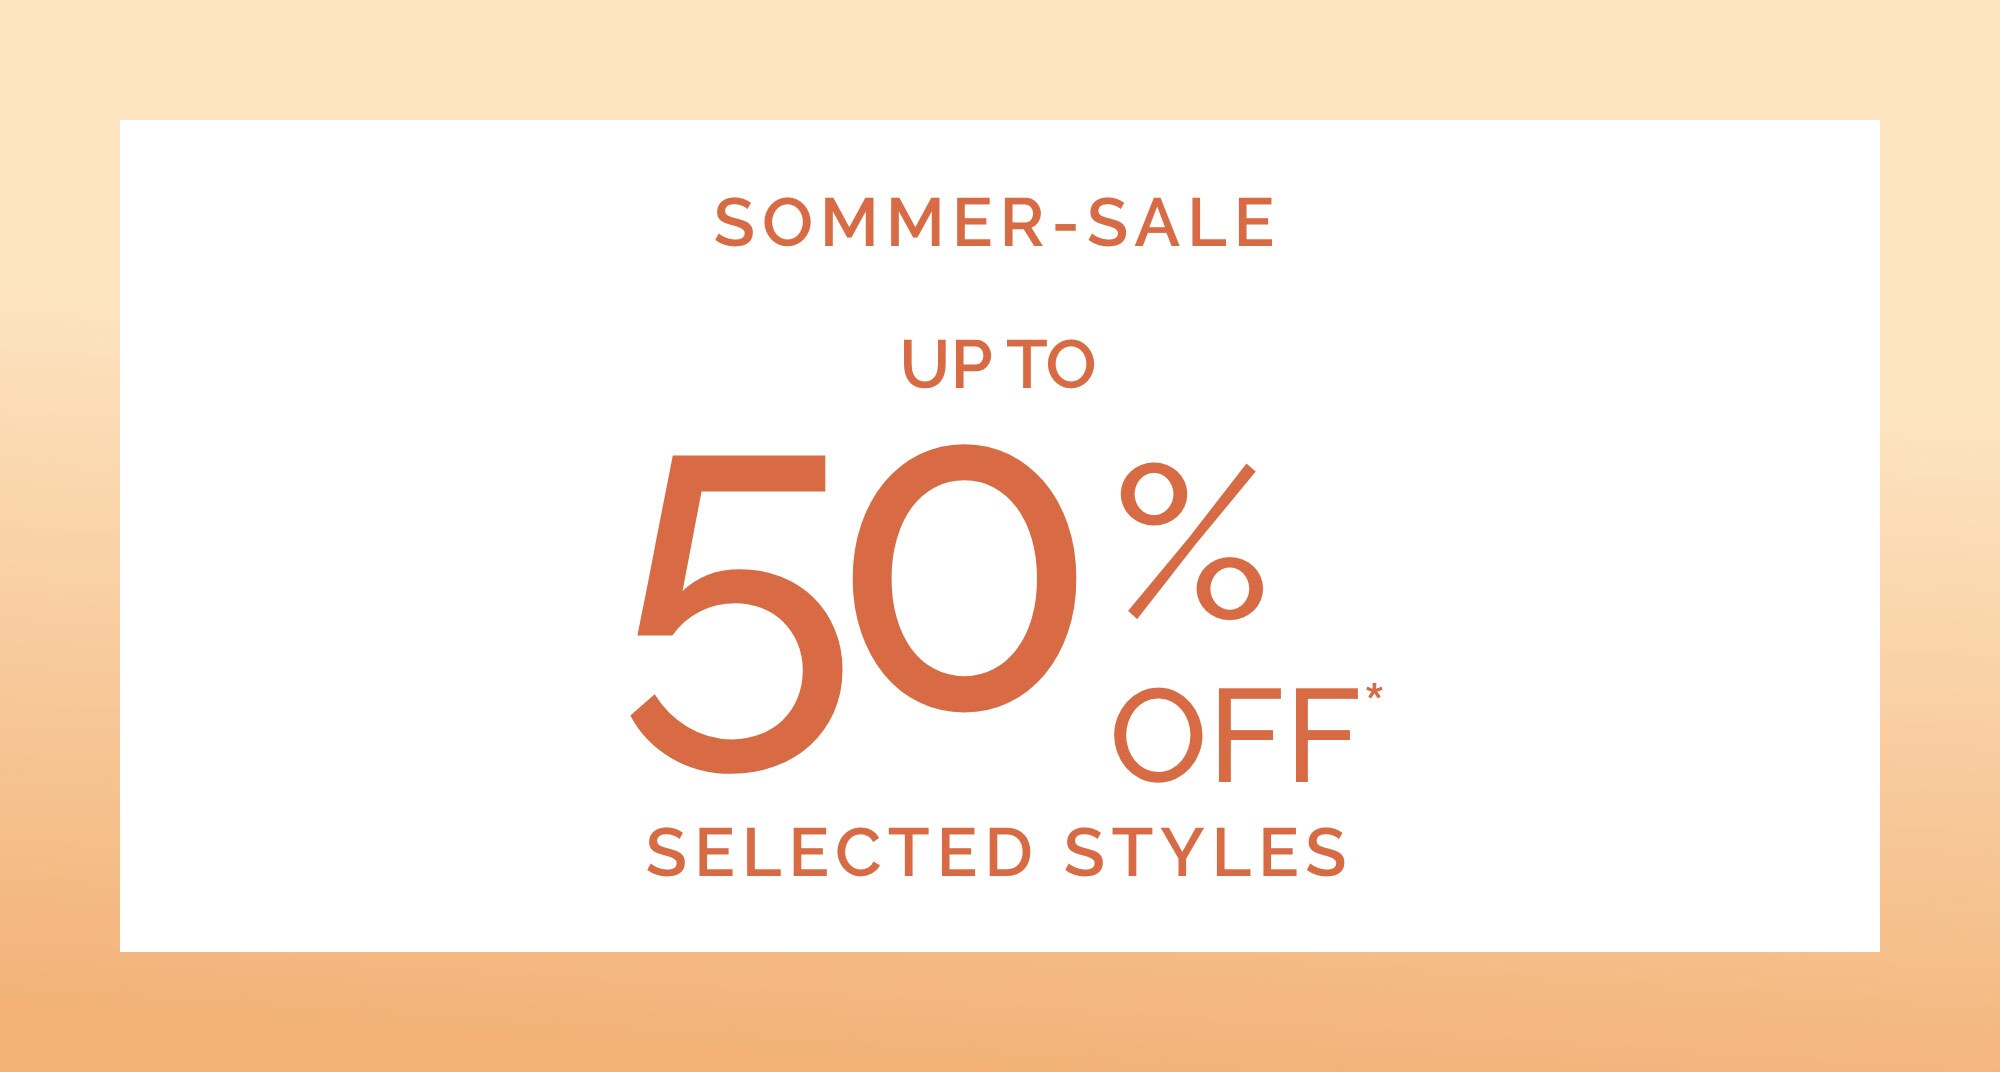 SUMMER SALE UP TO 50%* OFF SELECTED STYLES